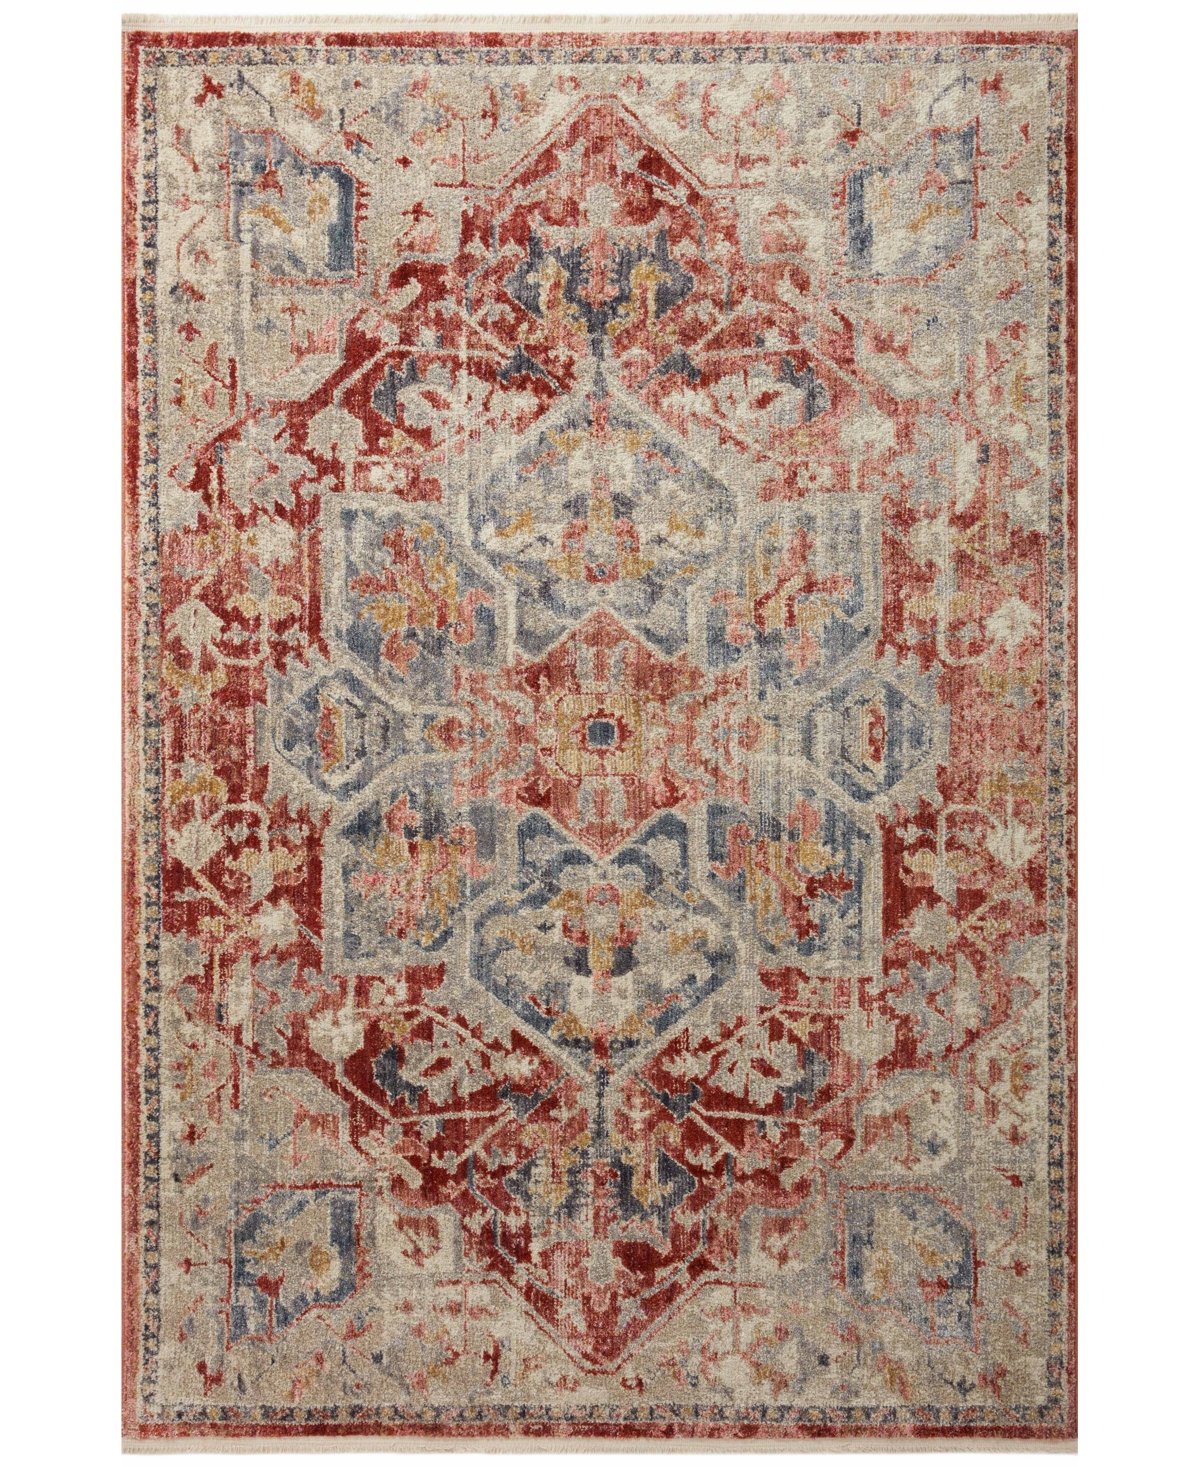 Magnolia Home By Joanna Gaines X Loloi Janey Jay-01 5'3" X 7'8" Area Rug In Maroon